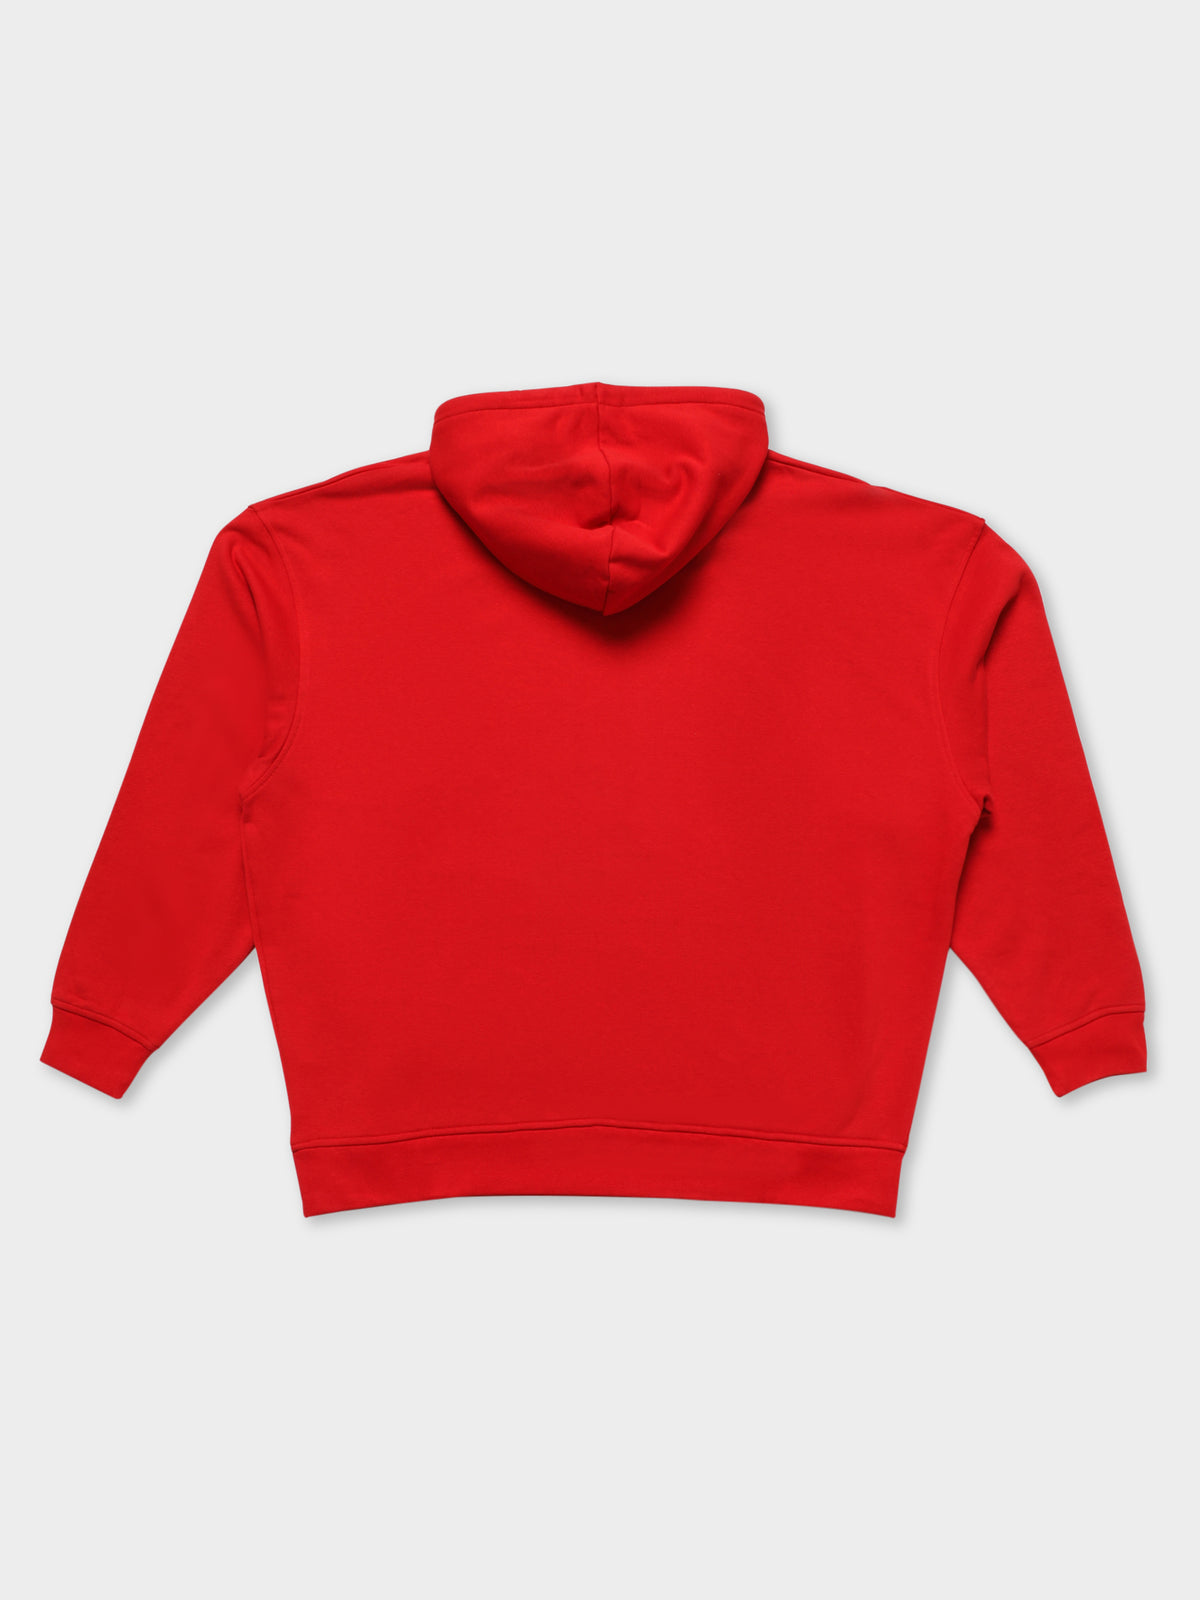 Authentic Daliar Hoodie in Red